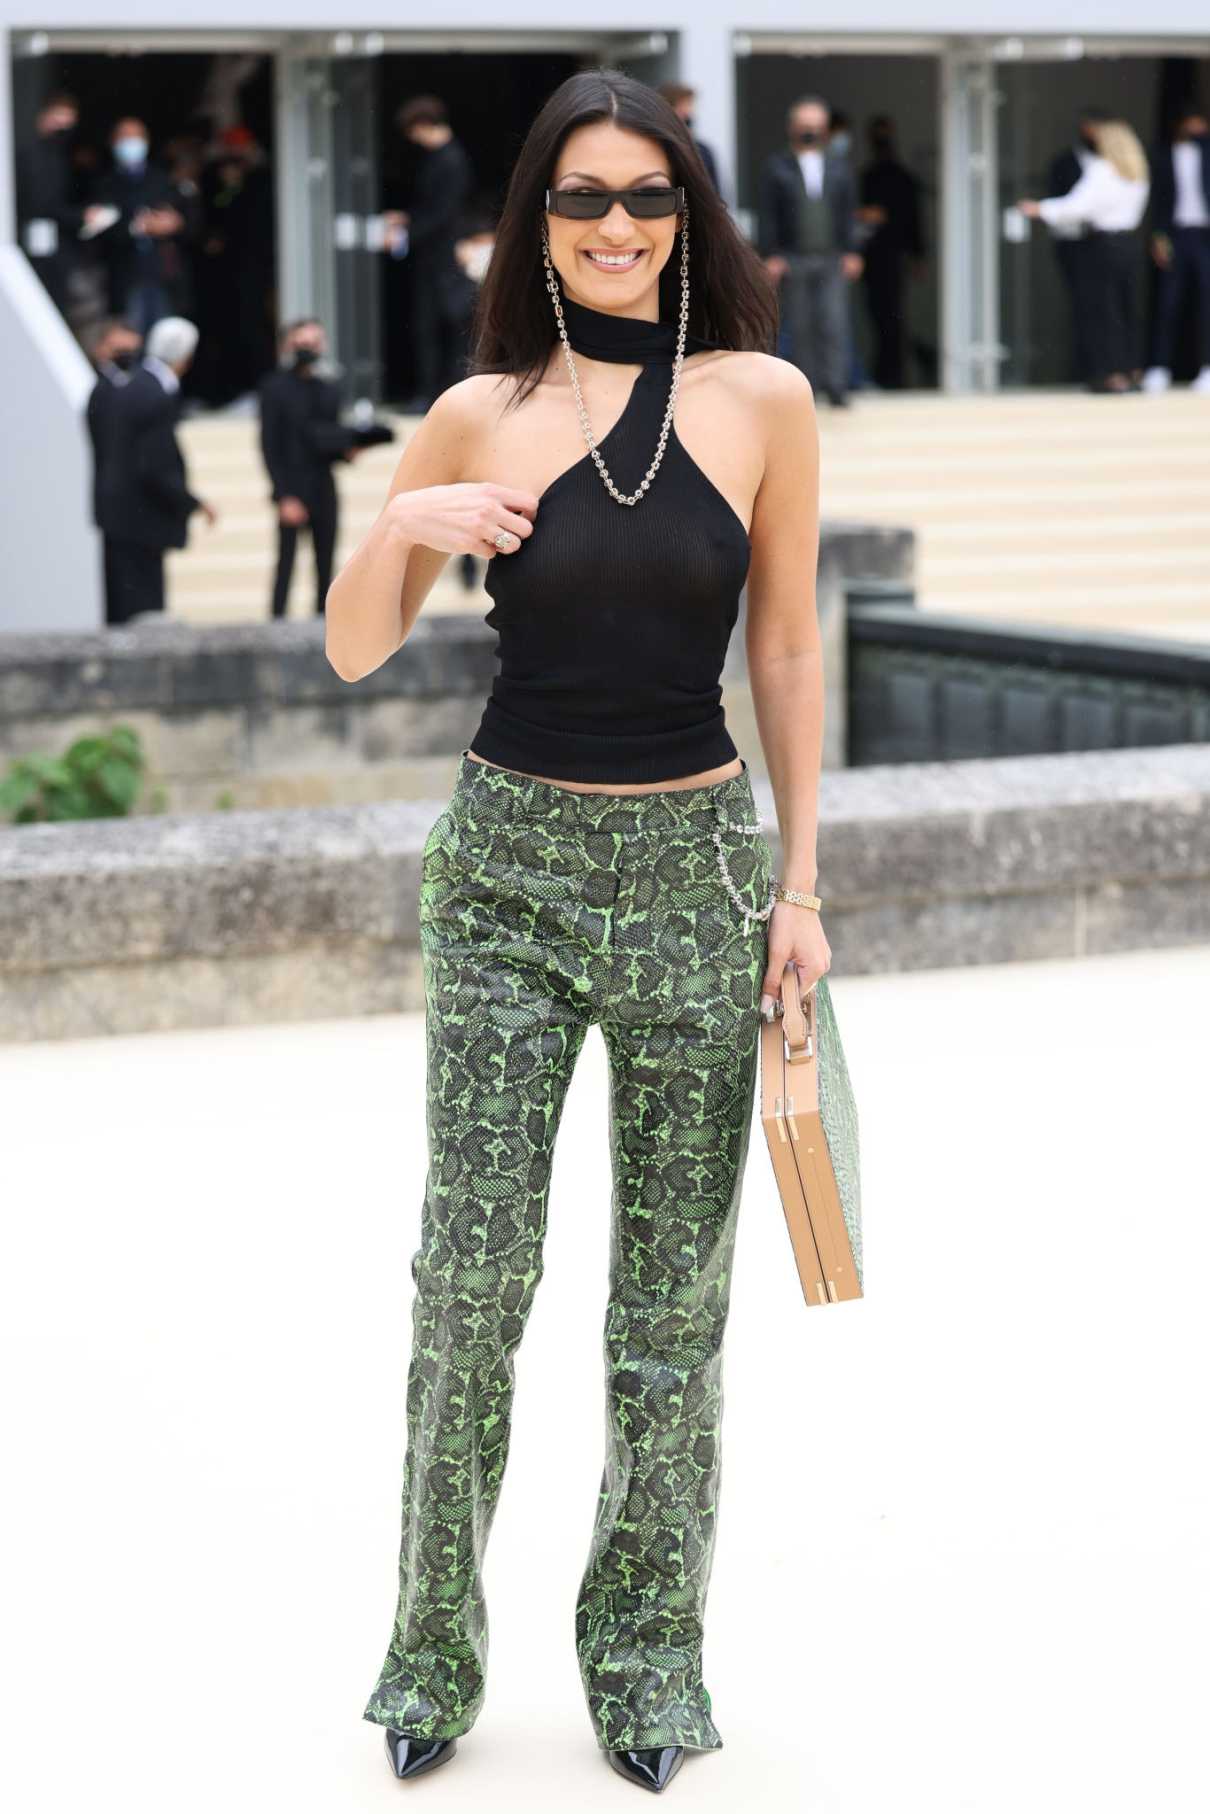 Bella Hadid in a Green Snakeskin Print Pants Arrives at 2022 Dior Homme ...